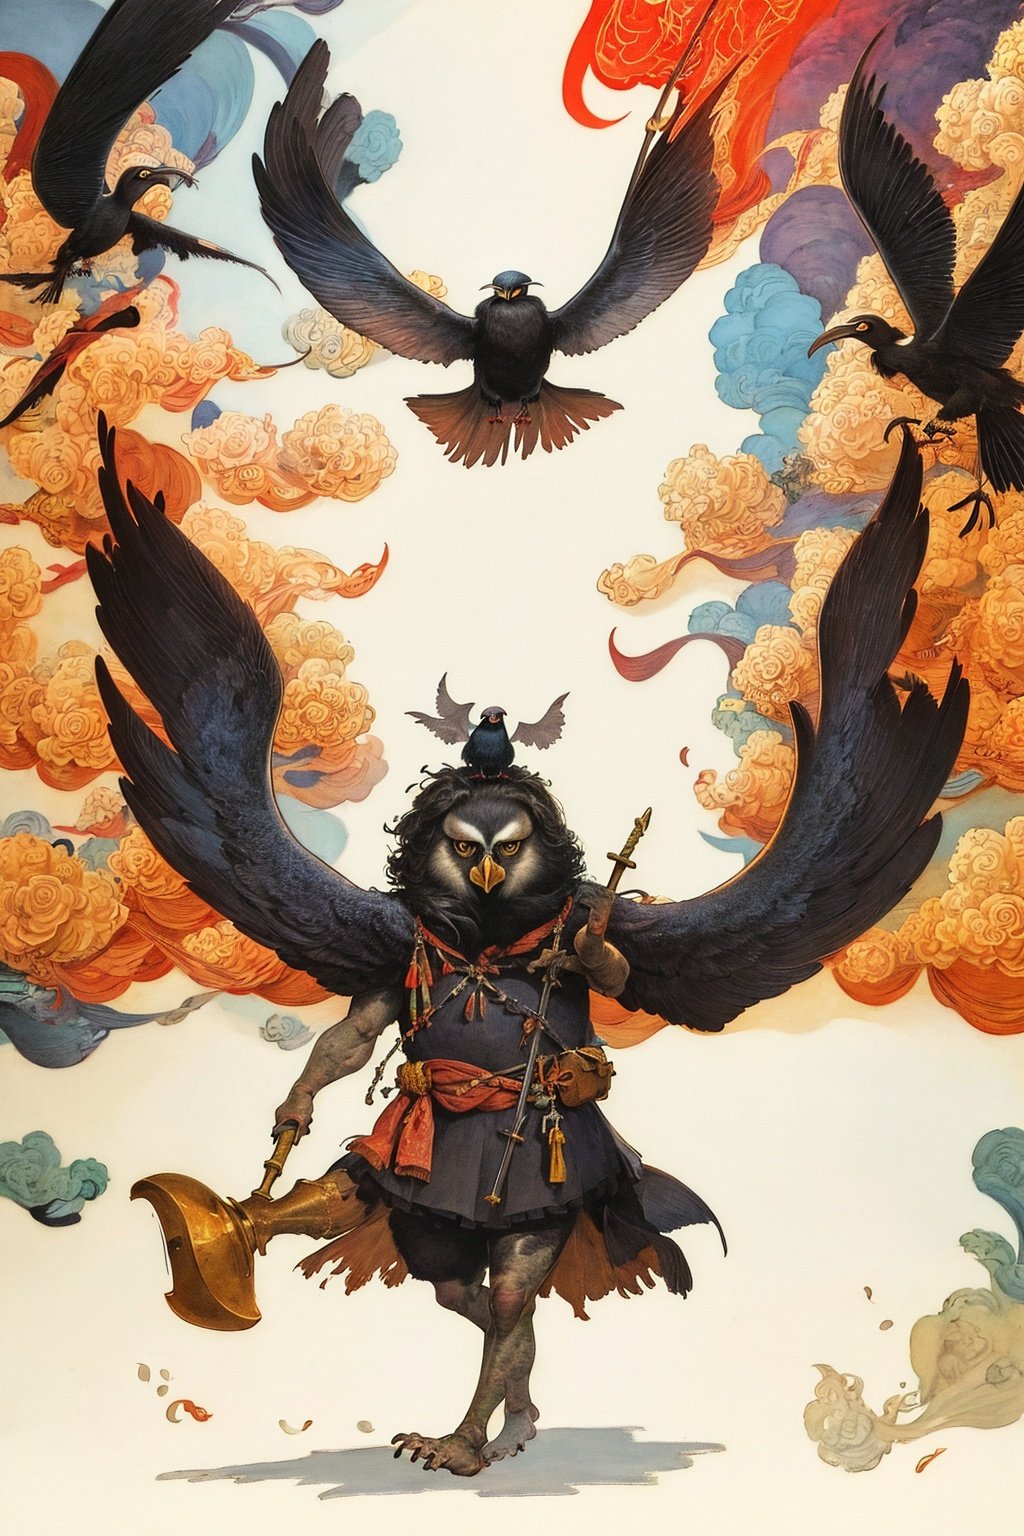 masterpiece,best quality,(HDR),8K,<lora:watercolour 7:0.8>,in gouache detailed paintings,a storybook illustration,art & language,crow holding a sword,the sky is filled with flames,symmetry,solo,